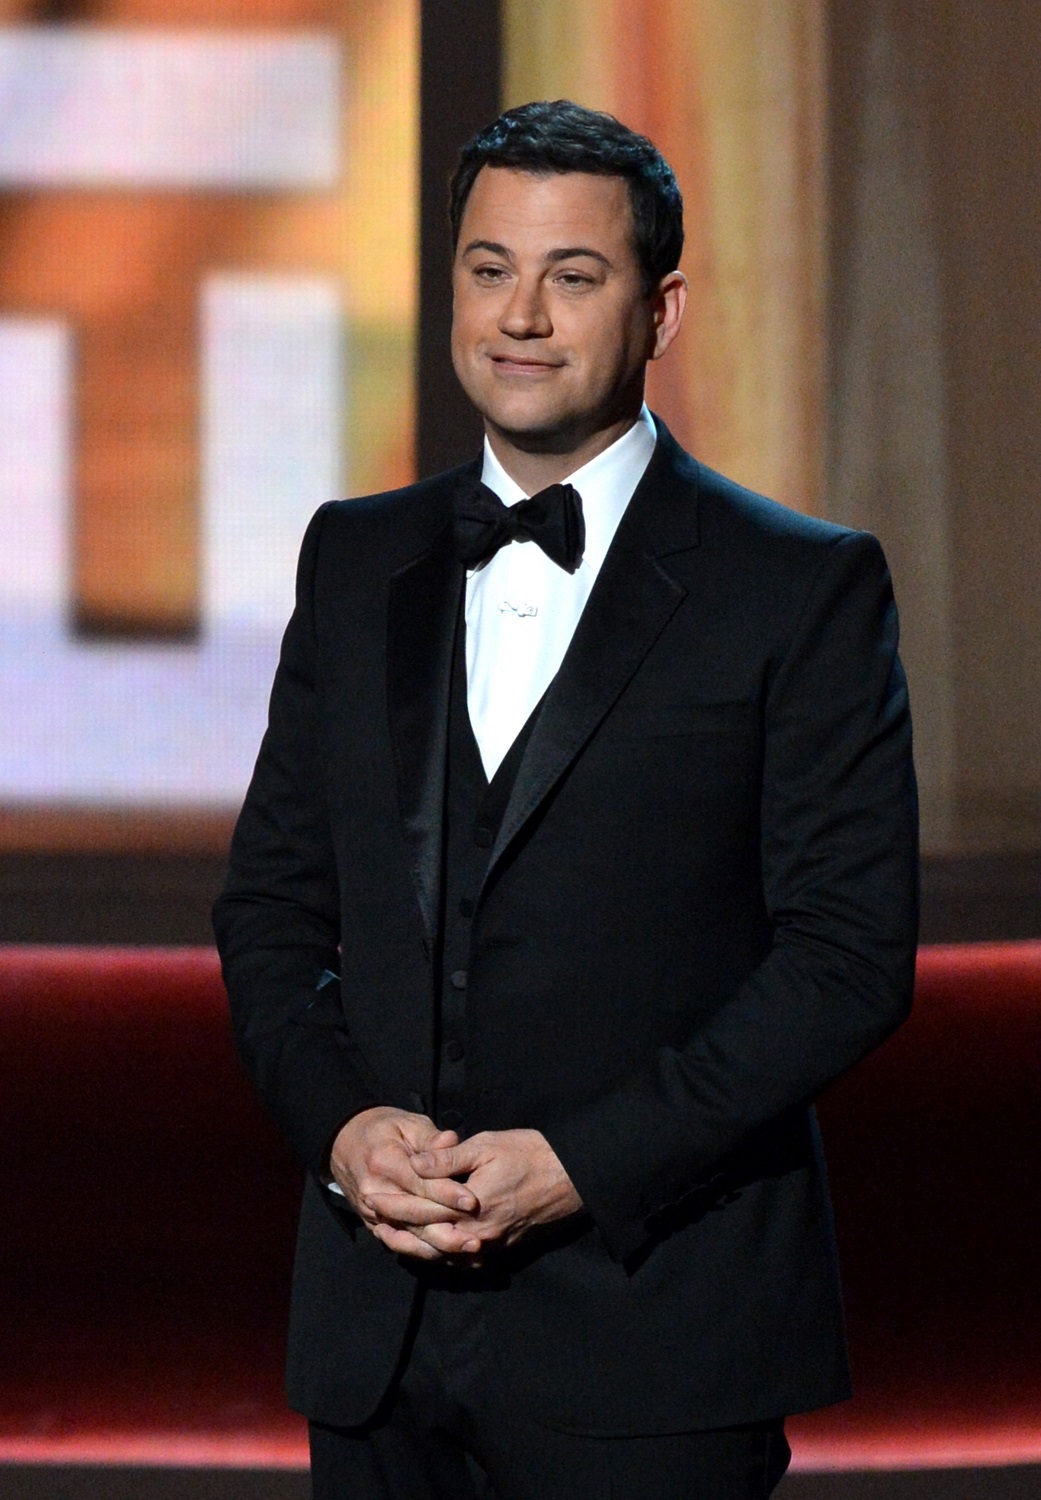 LOS ANGELES, CA - SEPTEMBER 23: Host Jimmy Kimmel speaks onstage at the 64th Primetime Emmy Awards at Nokia Theatre L.A. Live on September 23, 2012 in Los Angeles, California. (Photo by Lester Cohen/WireImage)